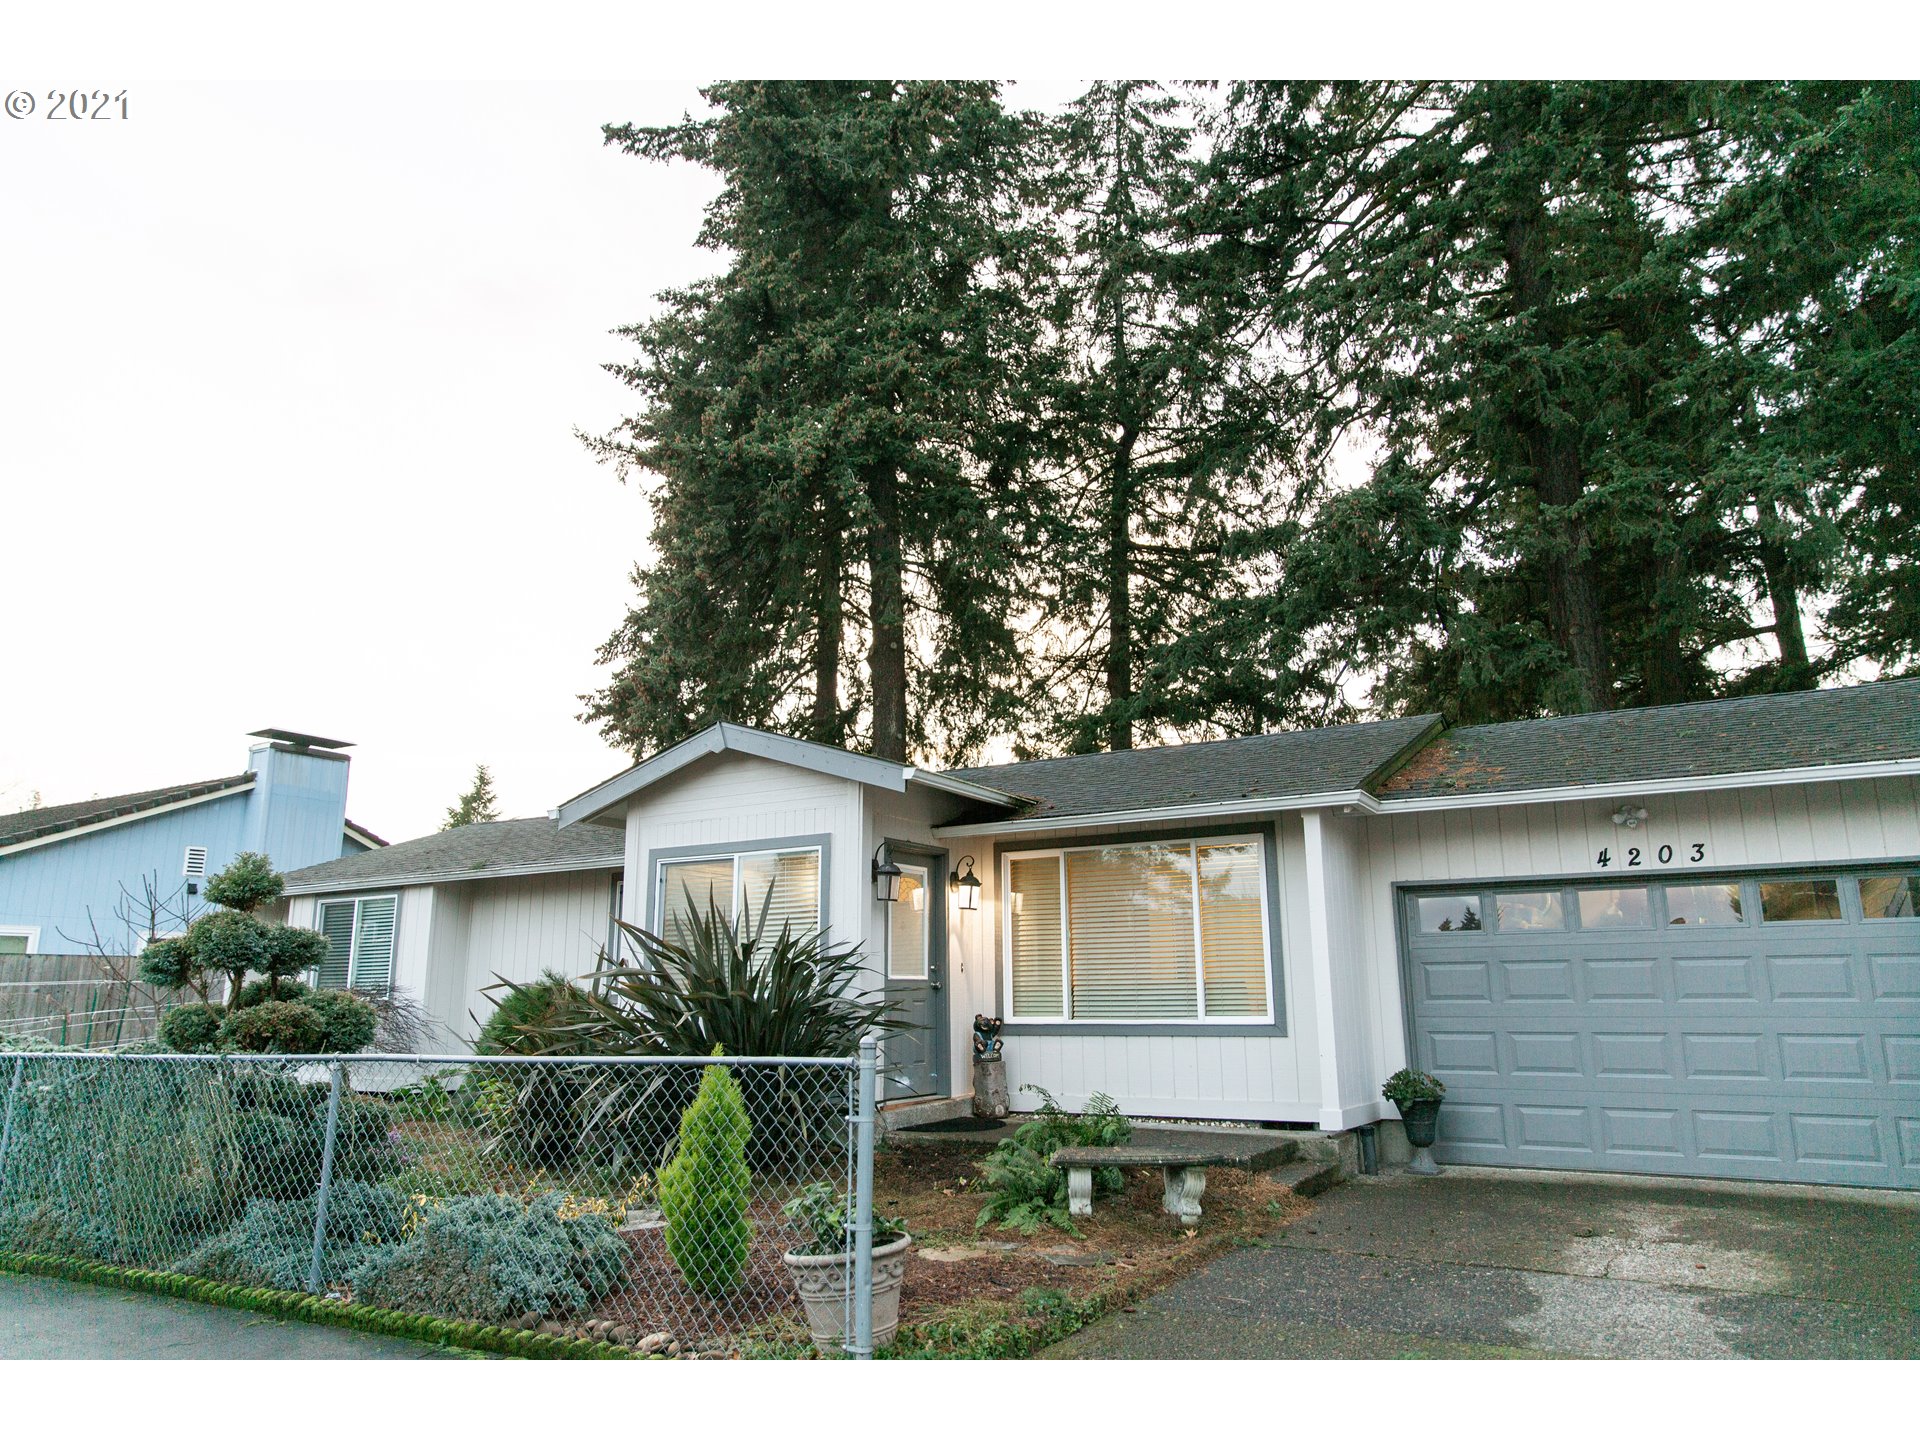 4203 SE 126TH AVE (1 of 30)